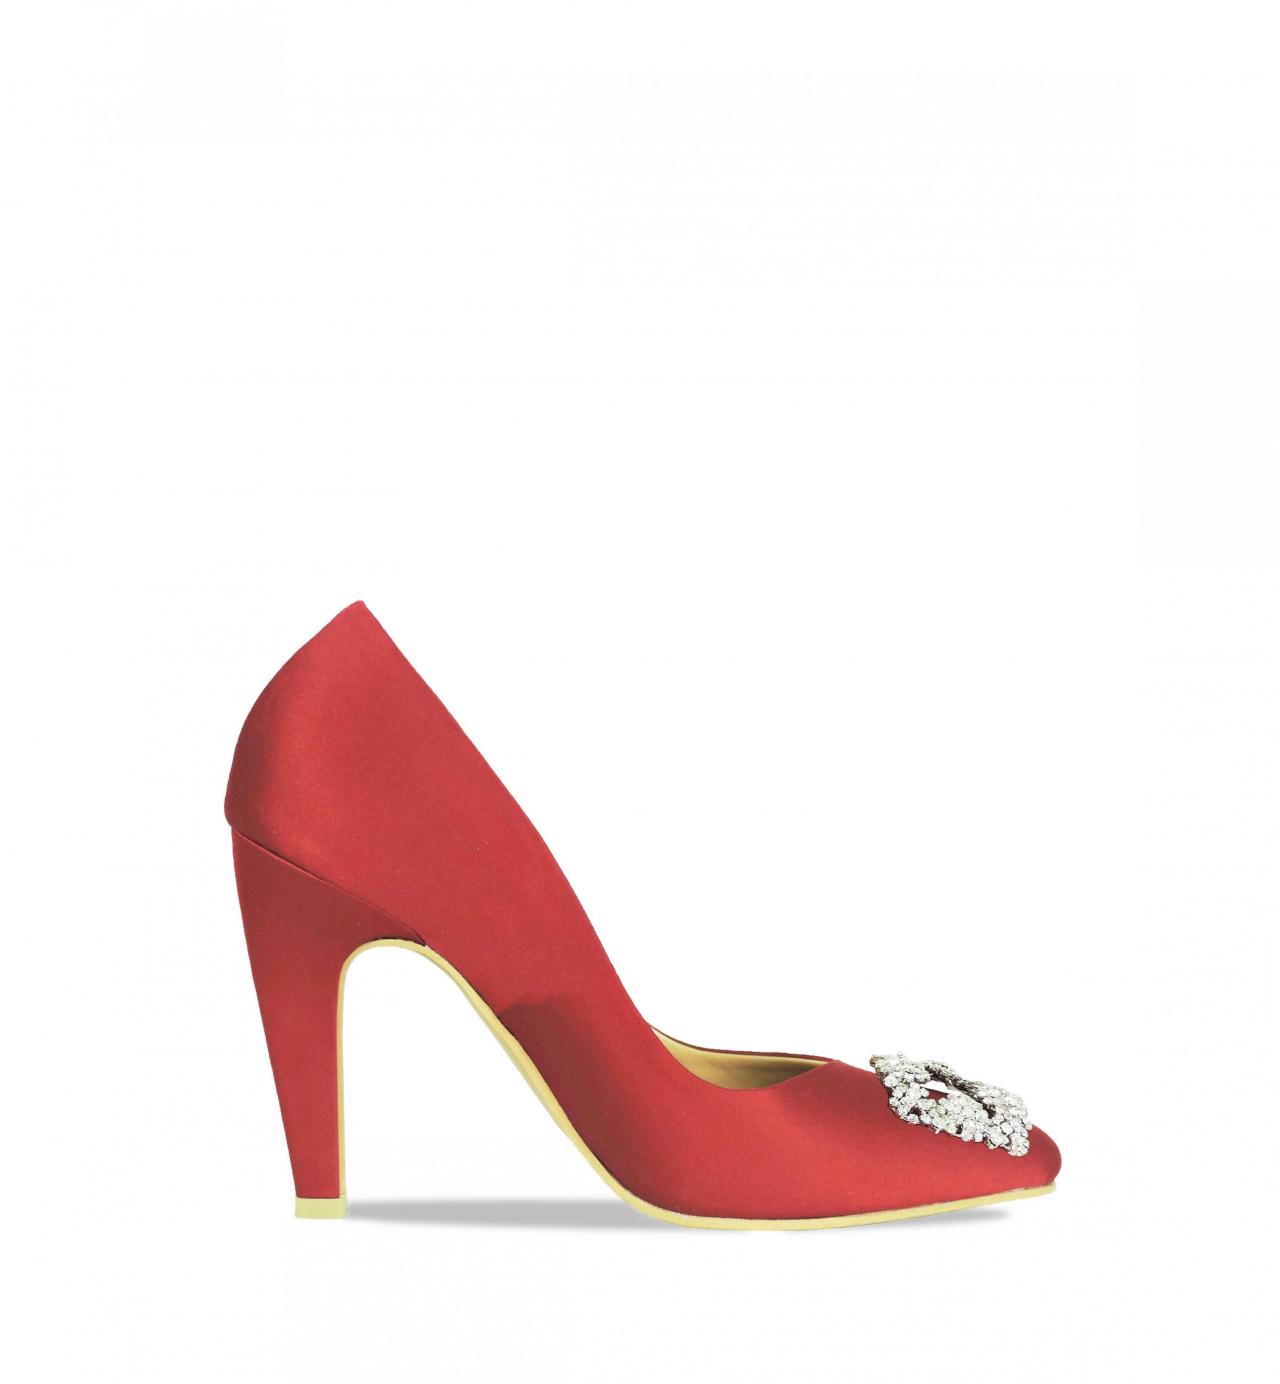 Jacquelee Audrey Ruby Red Heel With Ova Buckle